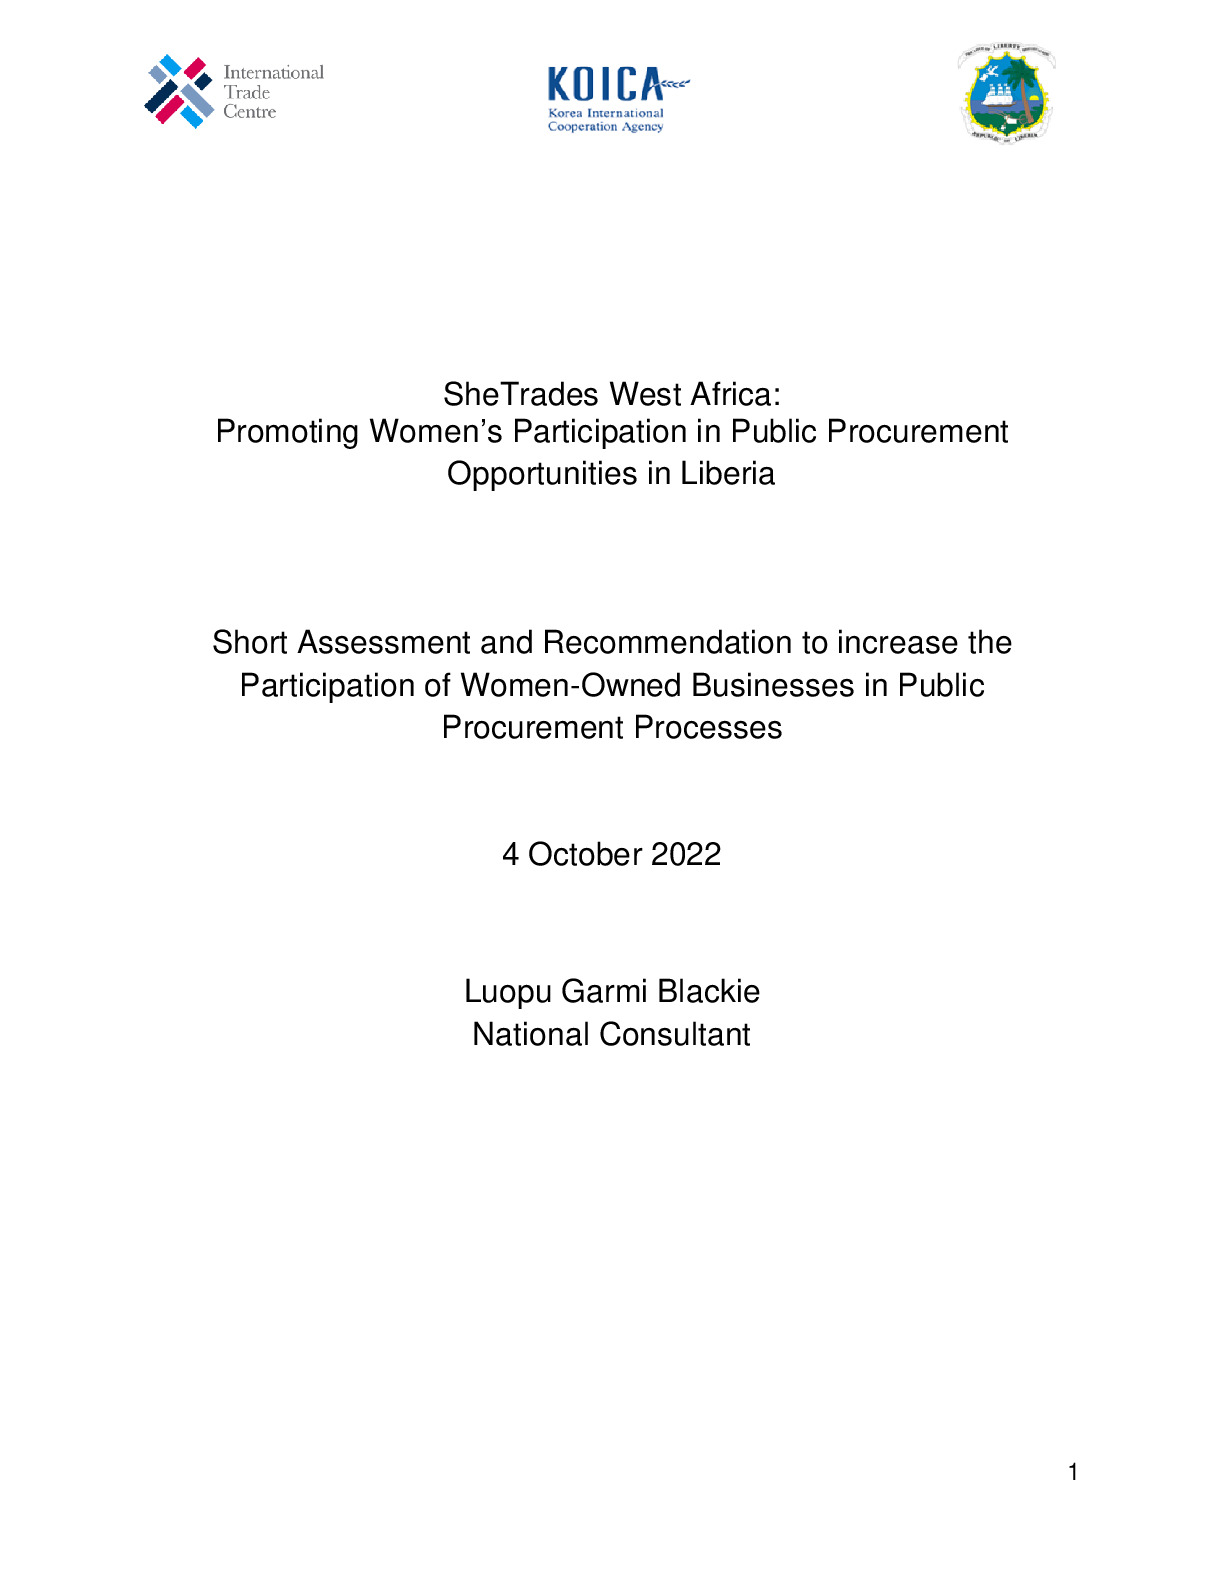 short_assessment_and_recommendation_to_increase_the_participation_of_women-owned_businesses_in_public_procurement_processes_-_en